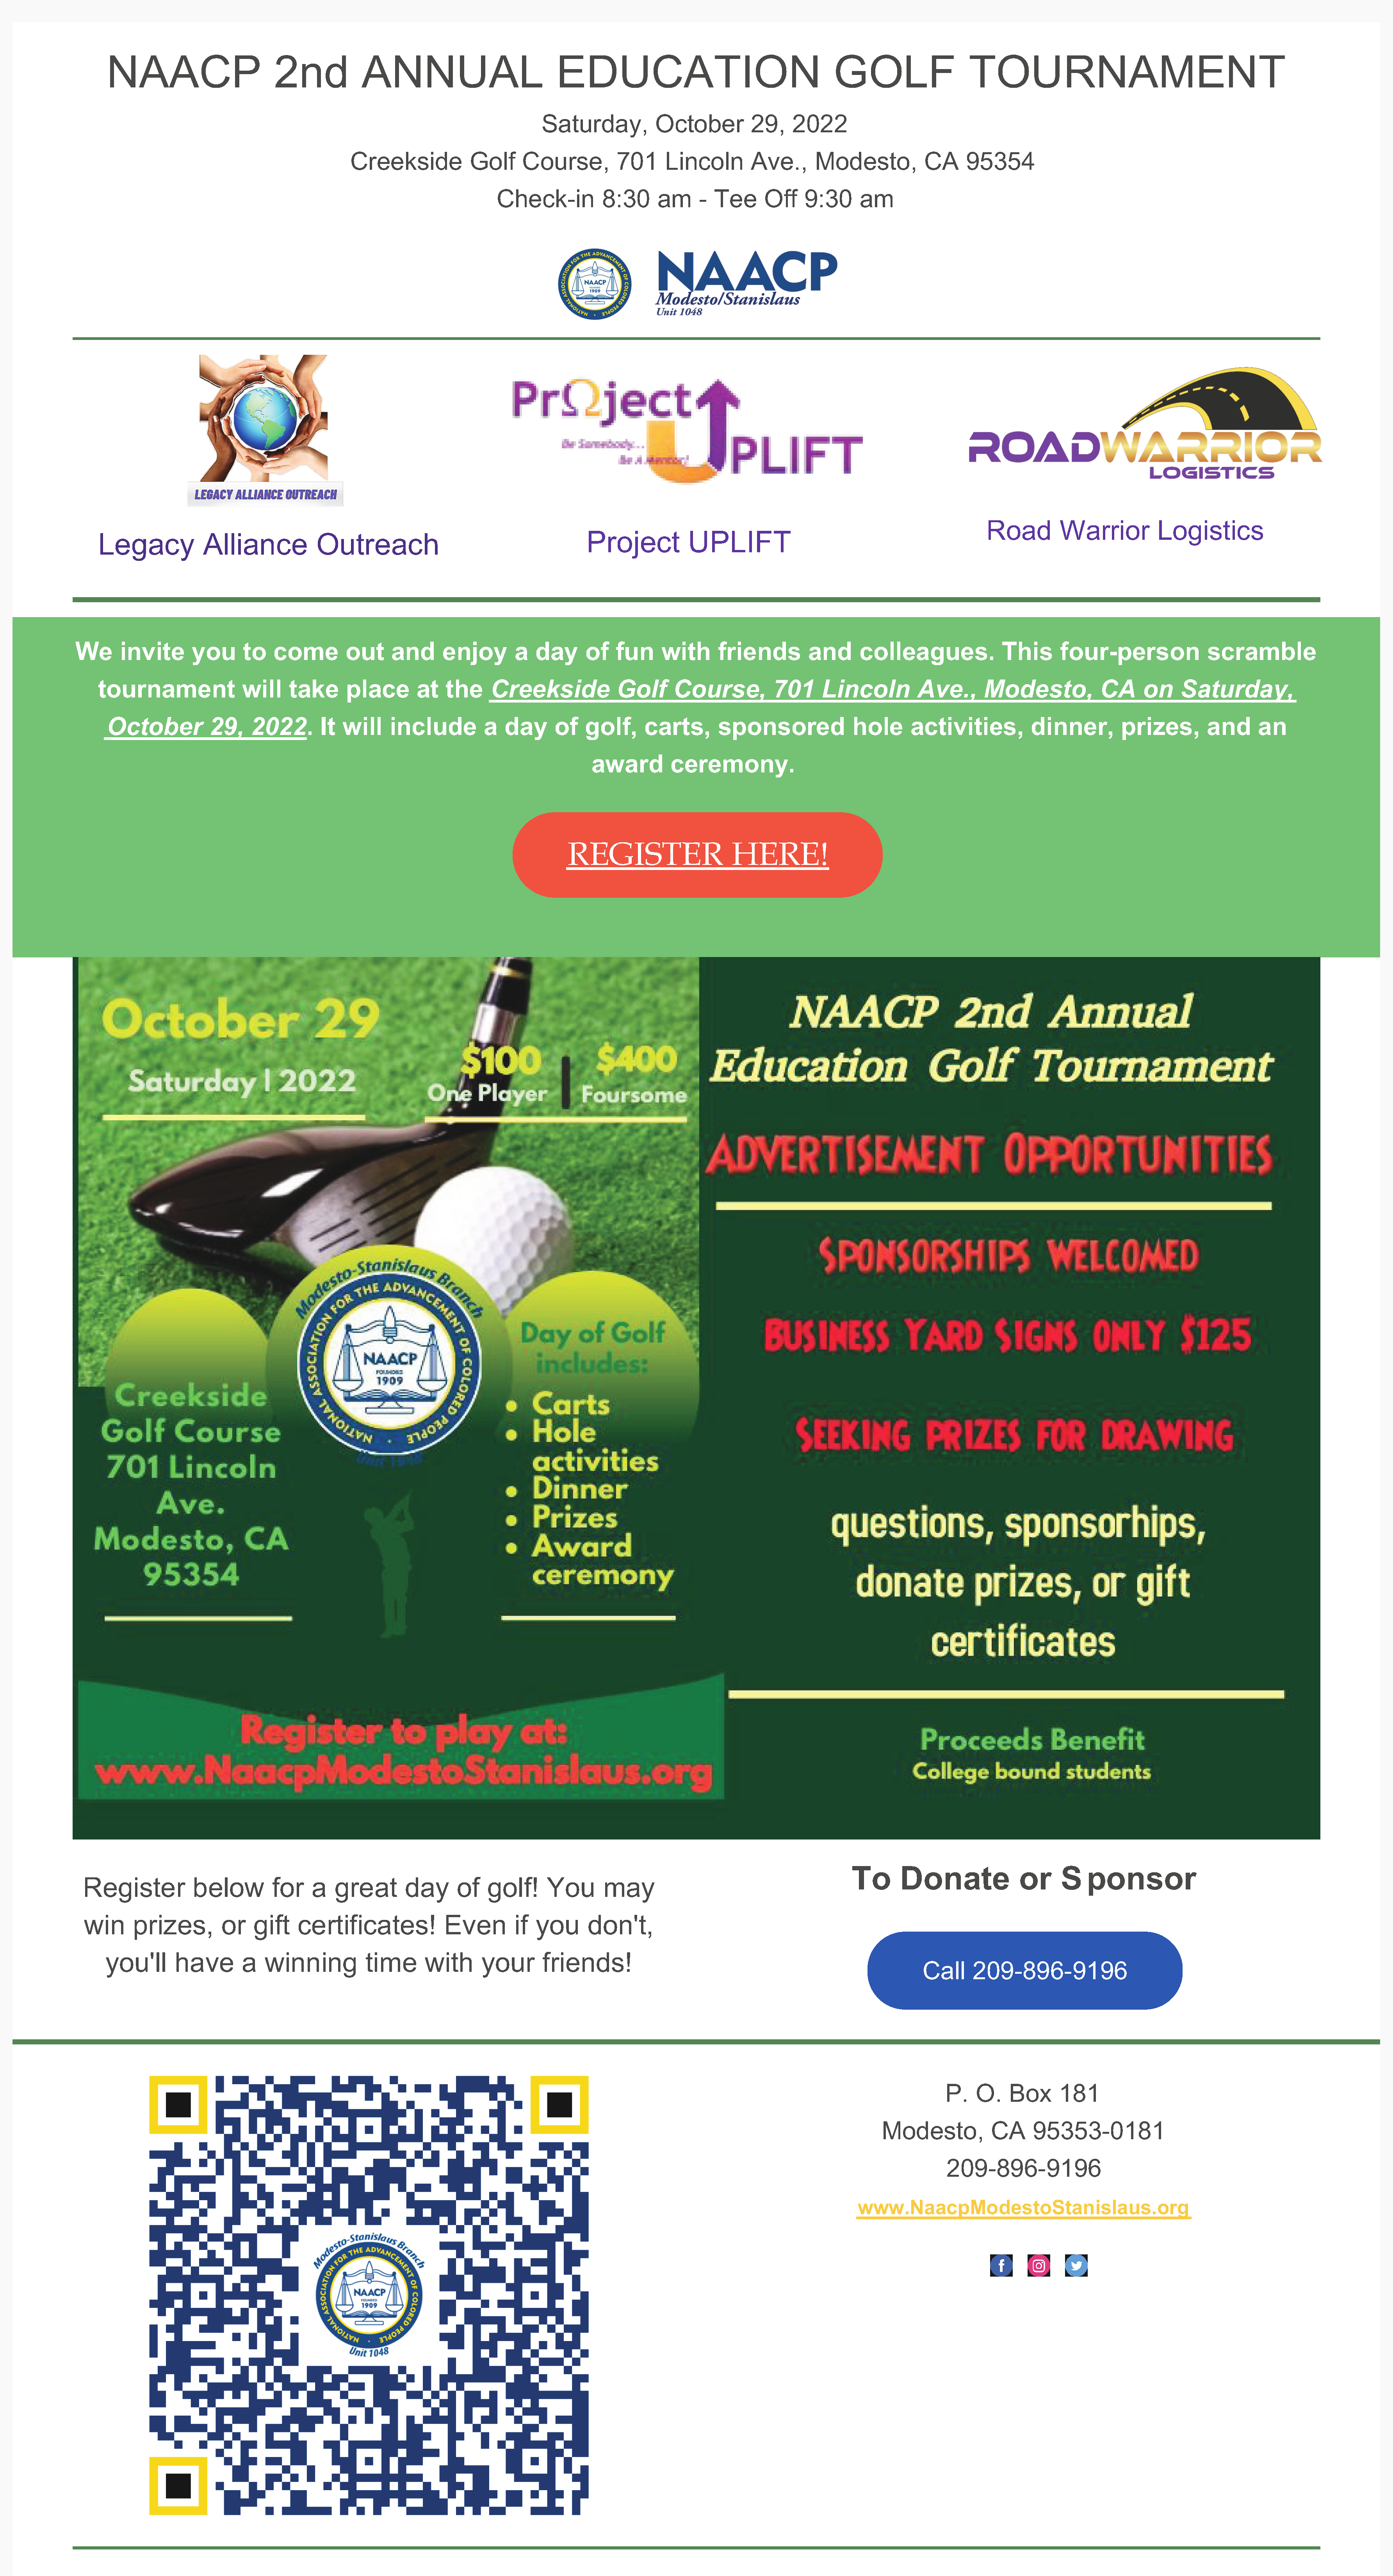 NAACP 2nd Annual Education Golf Tournament